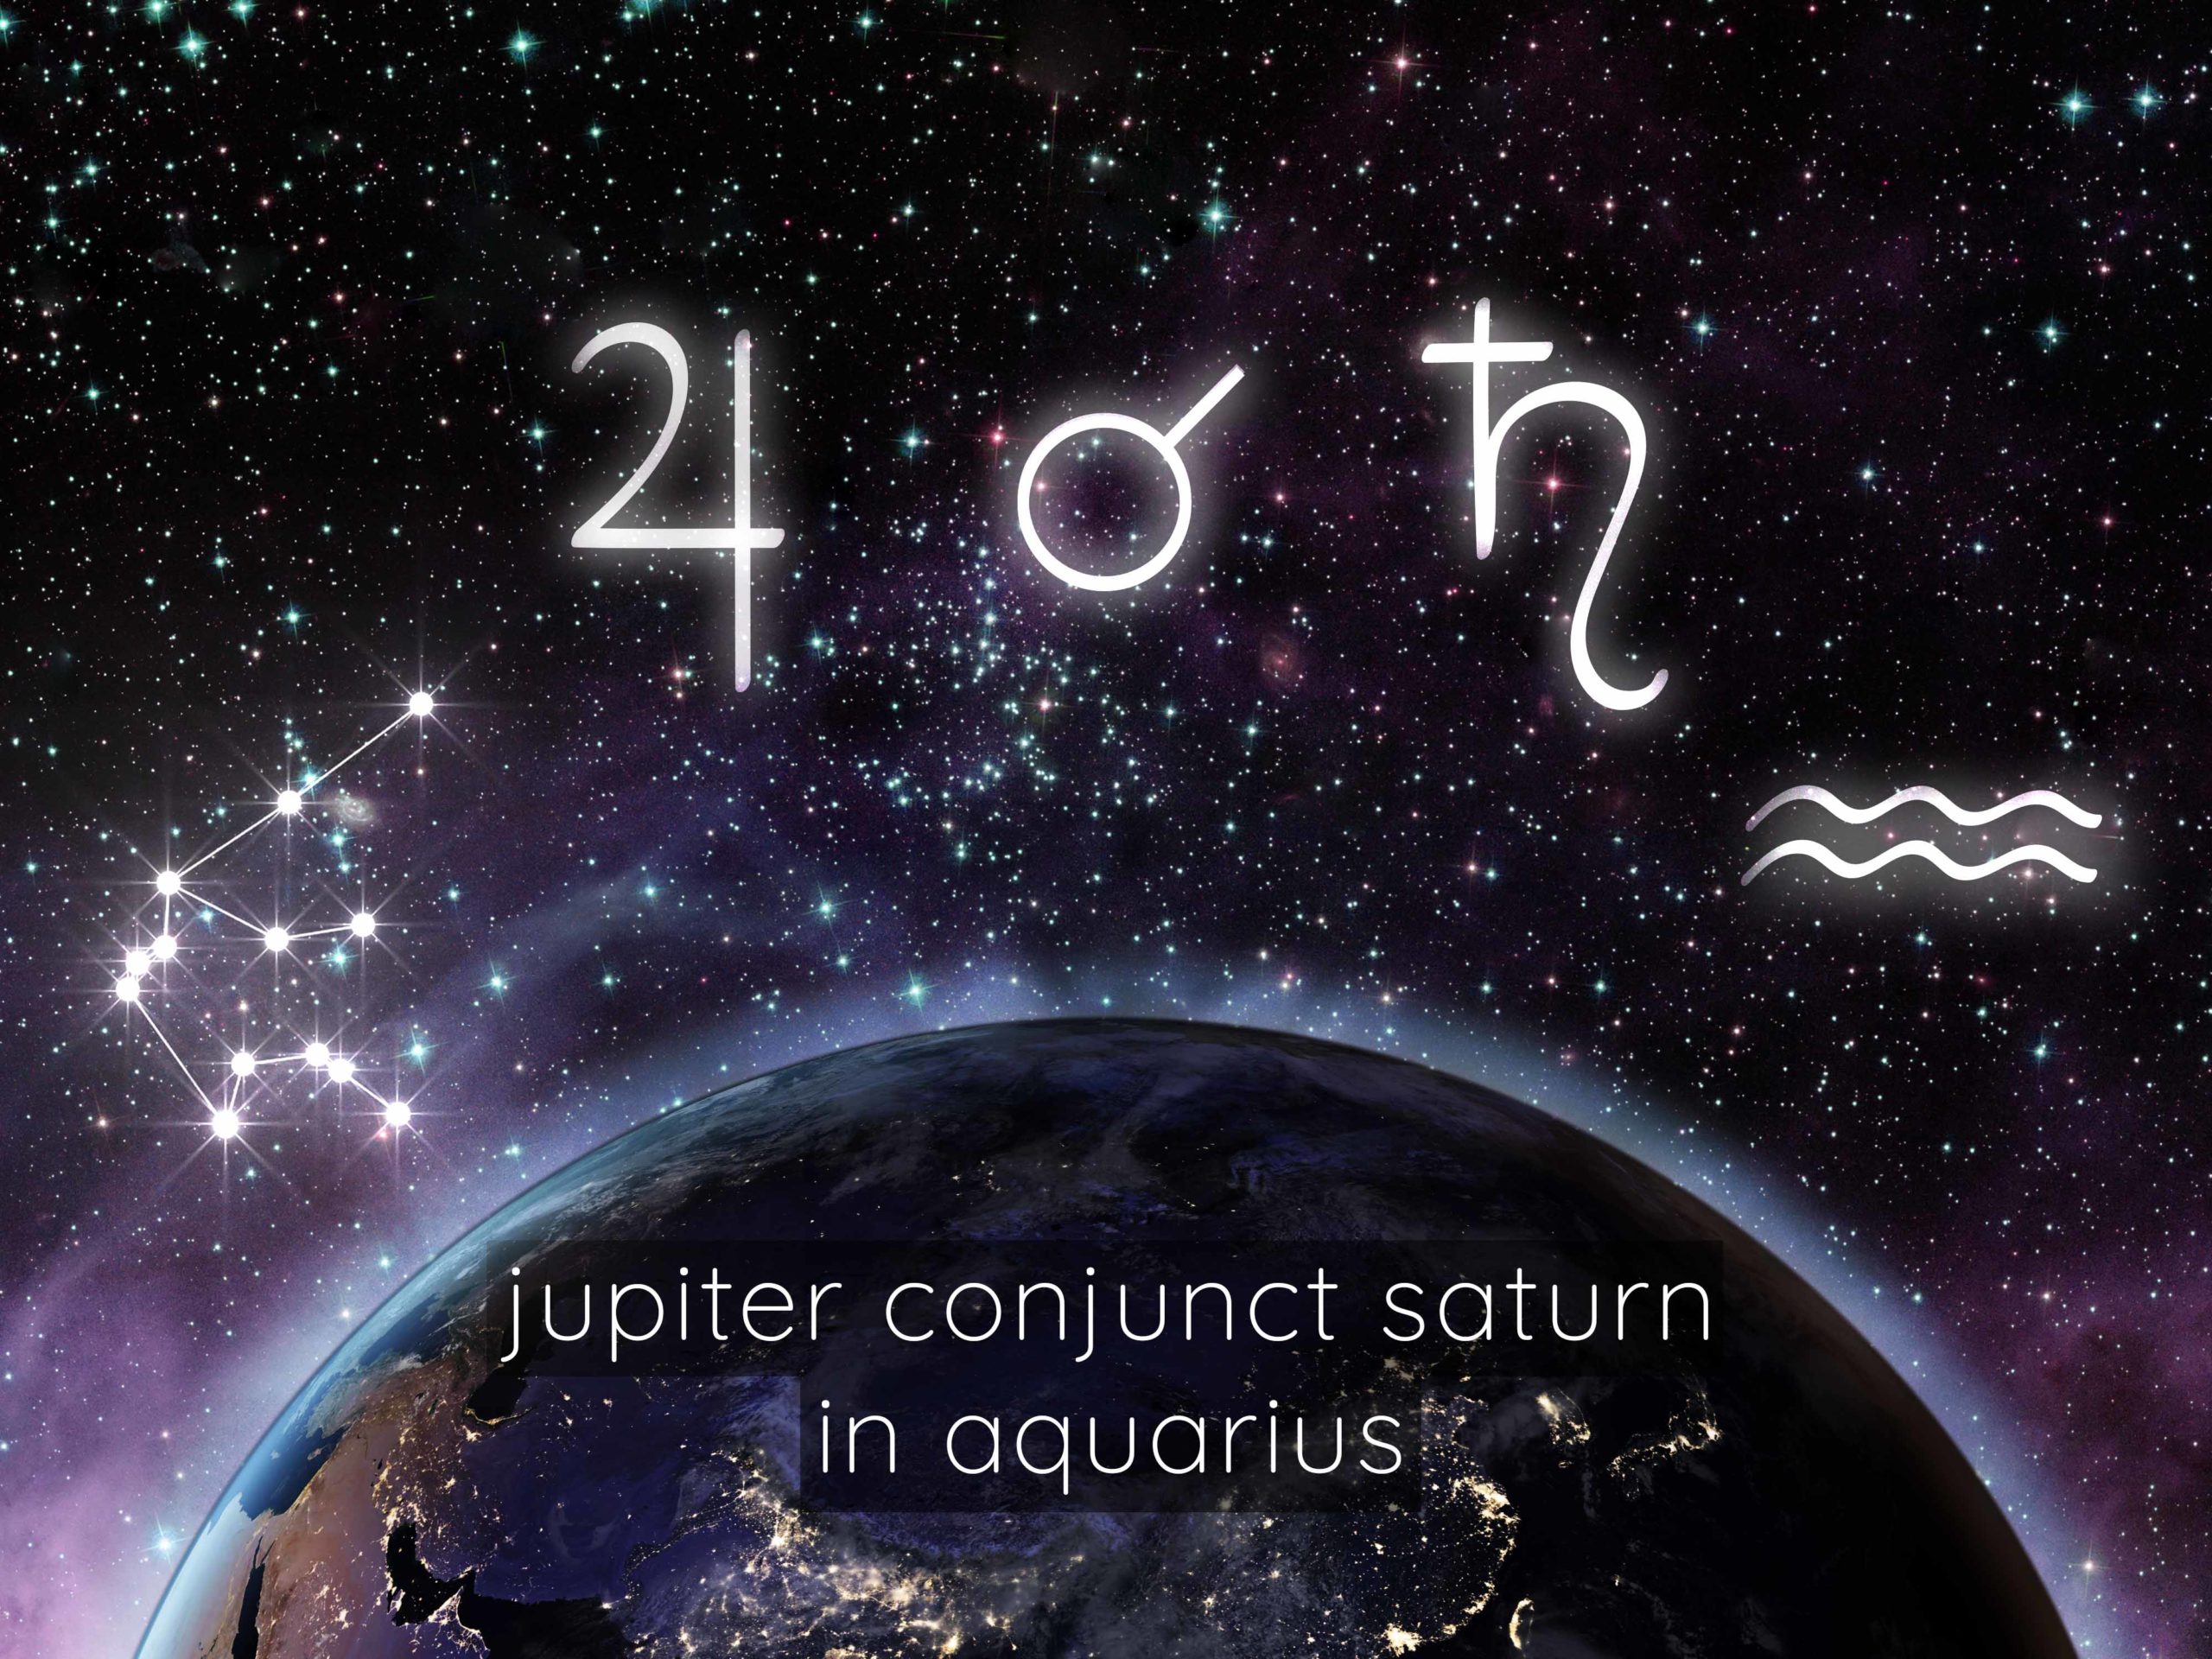 jupiter conjunct saturn on winter solstice- midwifing the birth of the new age of aquarius (12/21/20)